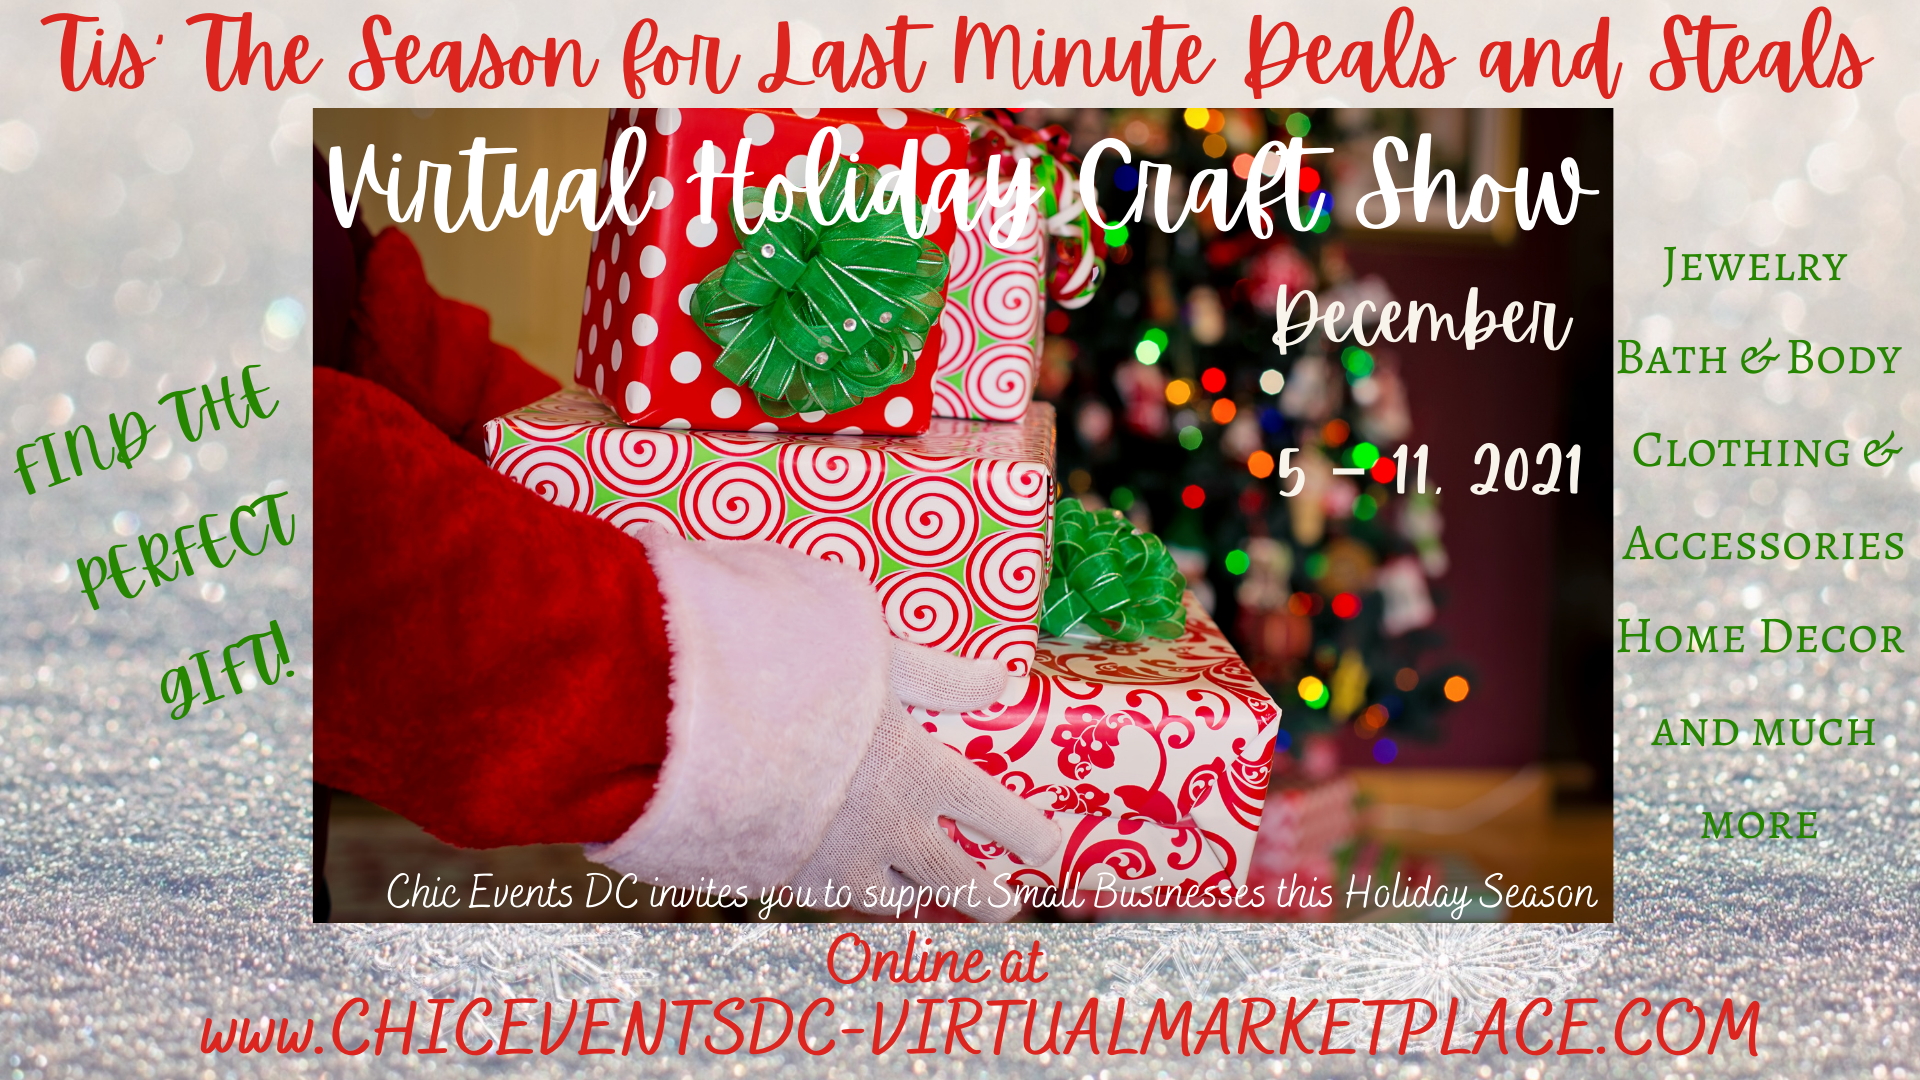 Silver Spring Christmas Market & Holiday Craft Show